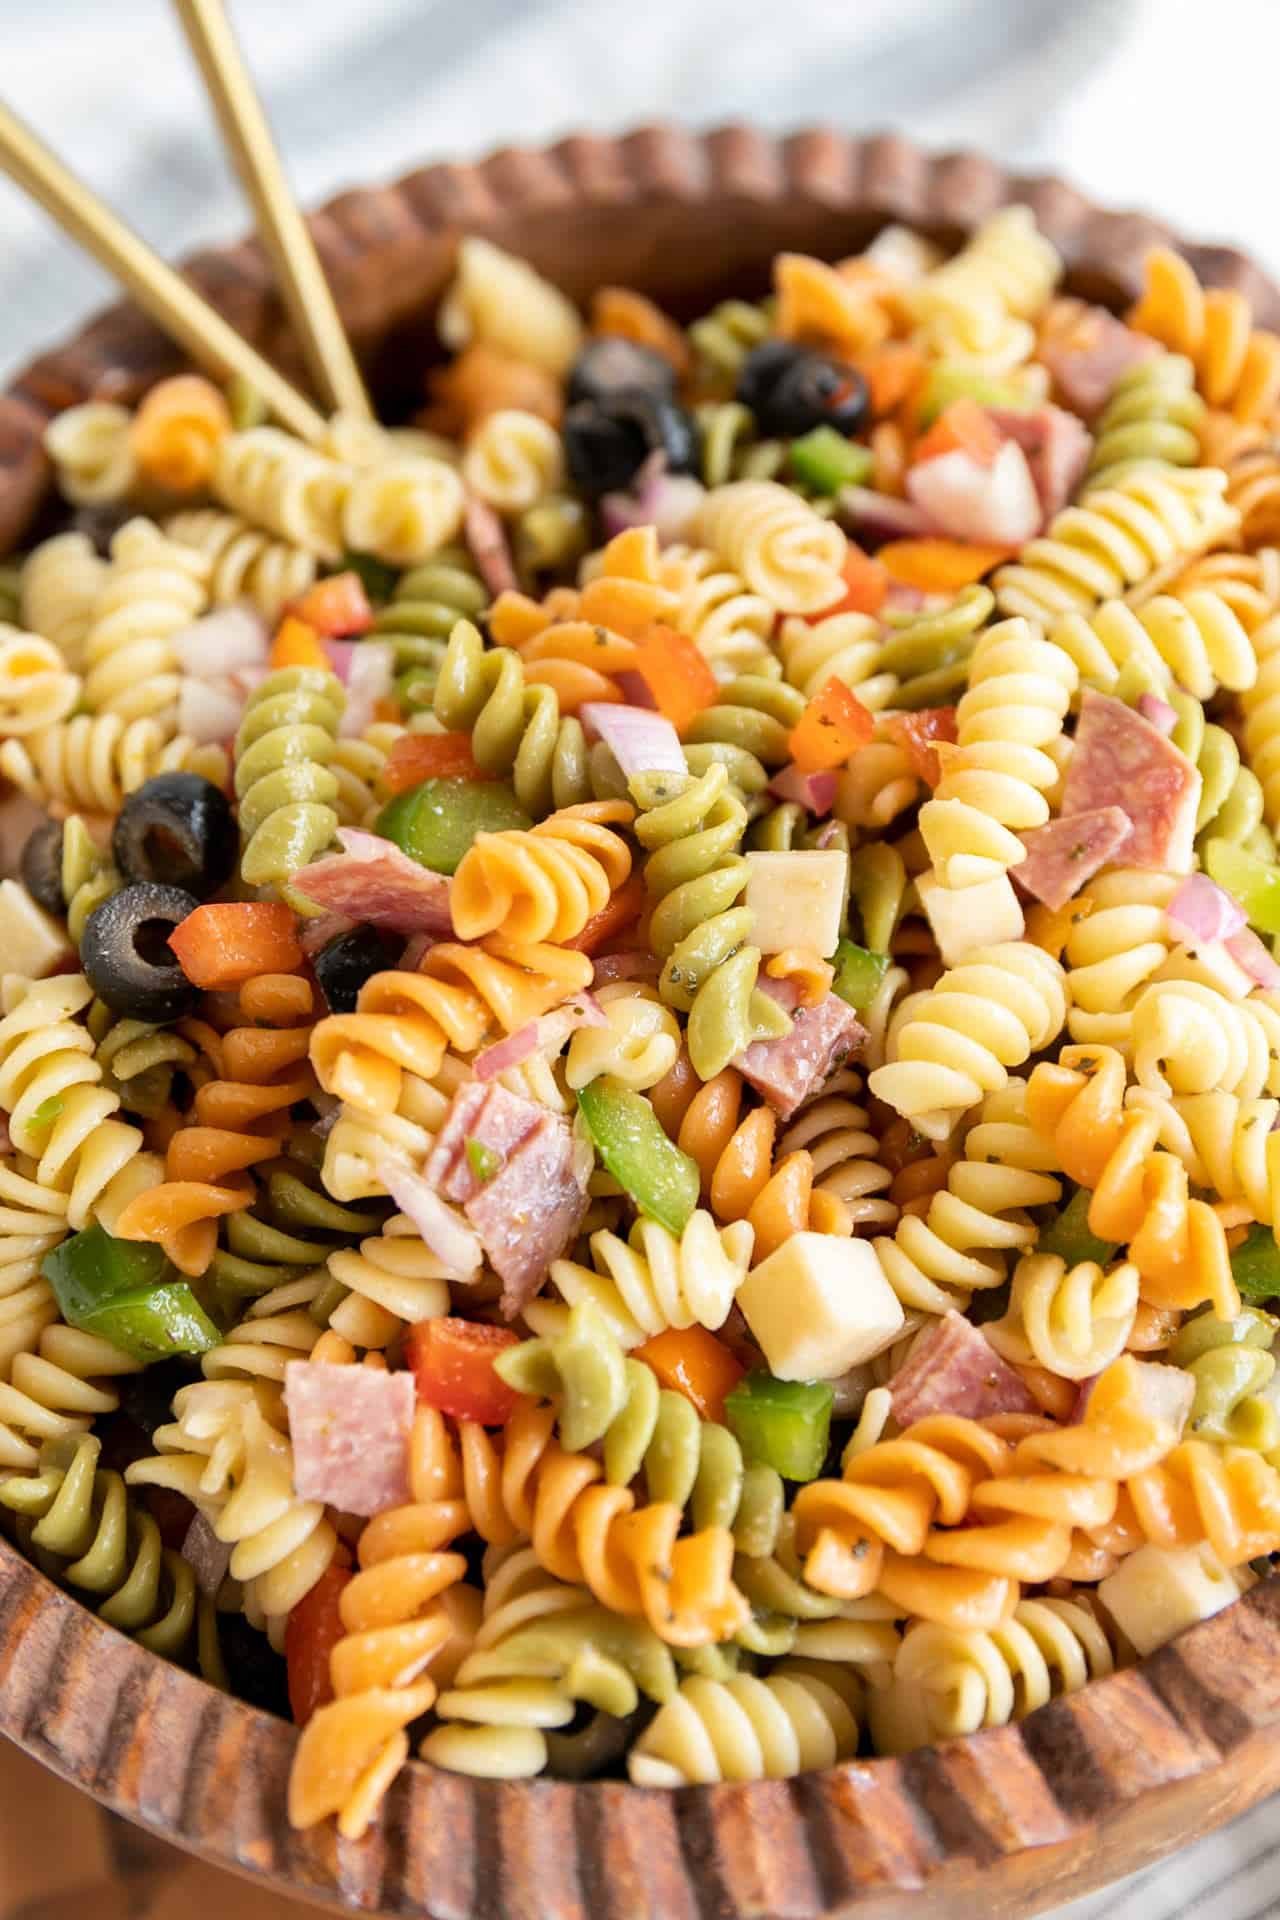 Antipasto Pasta Salad: Ingredients, Nutrition, and Serving Tips